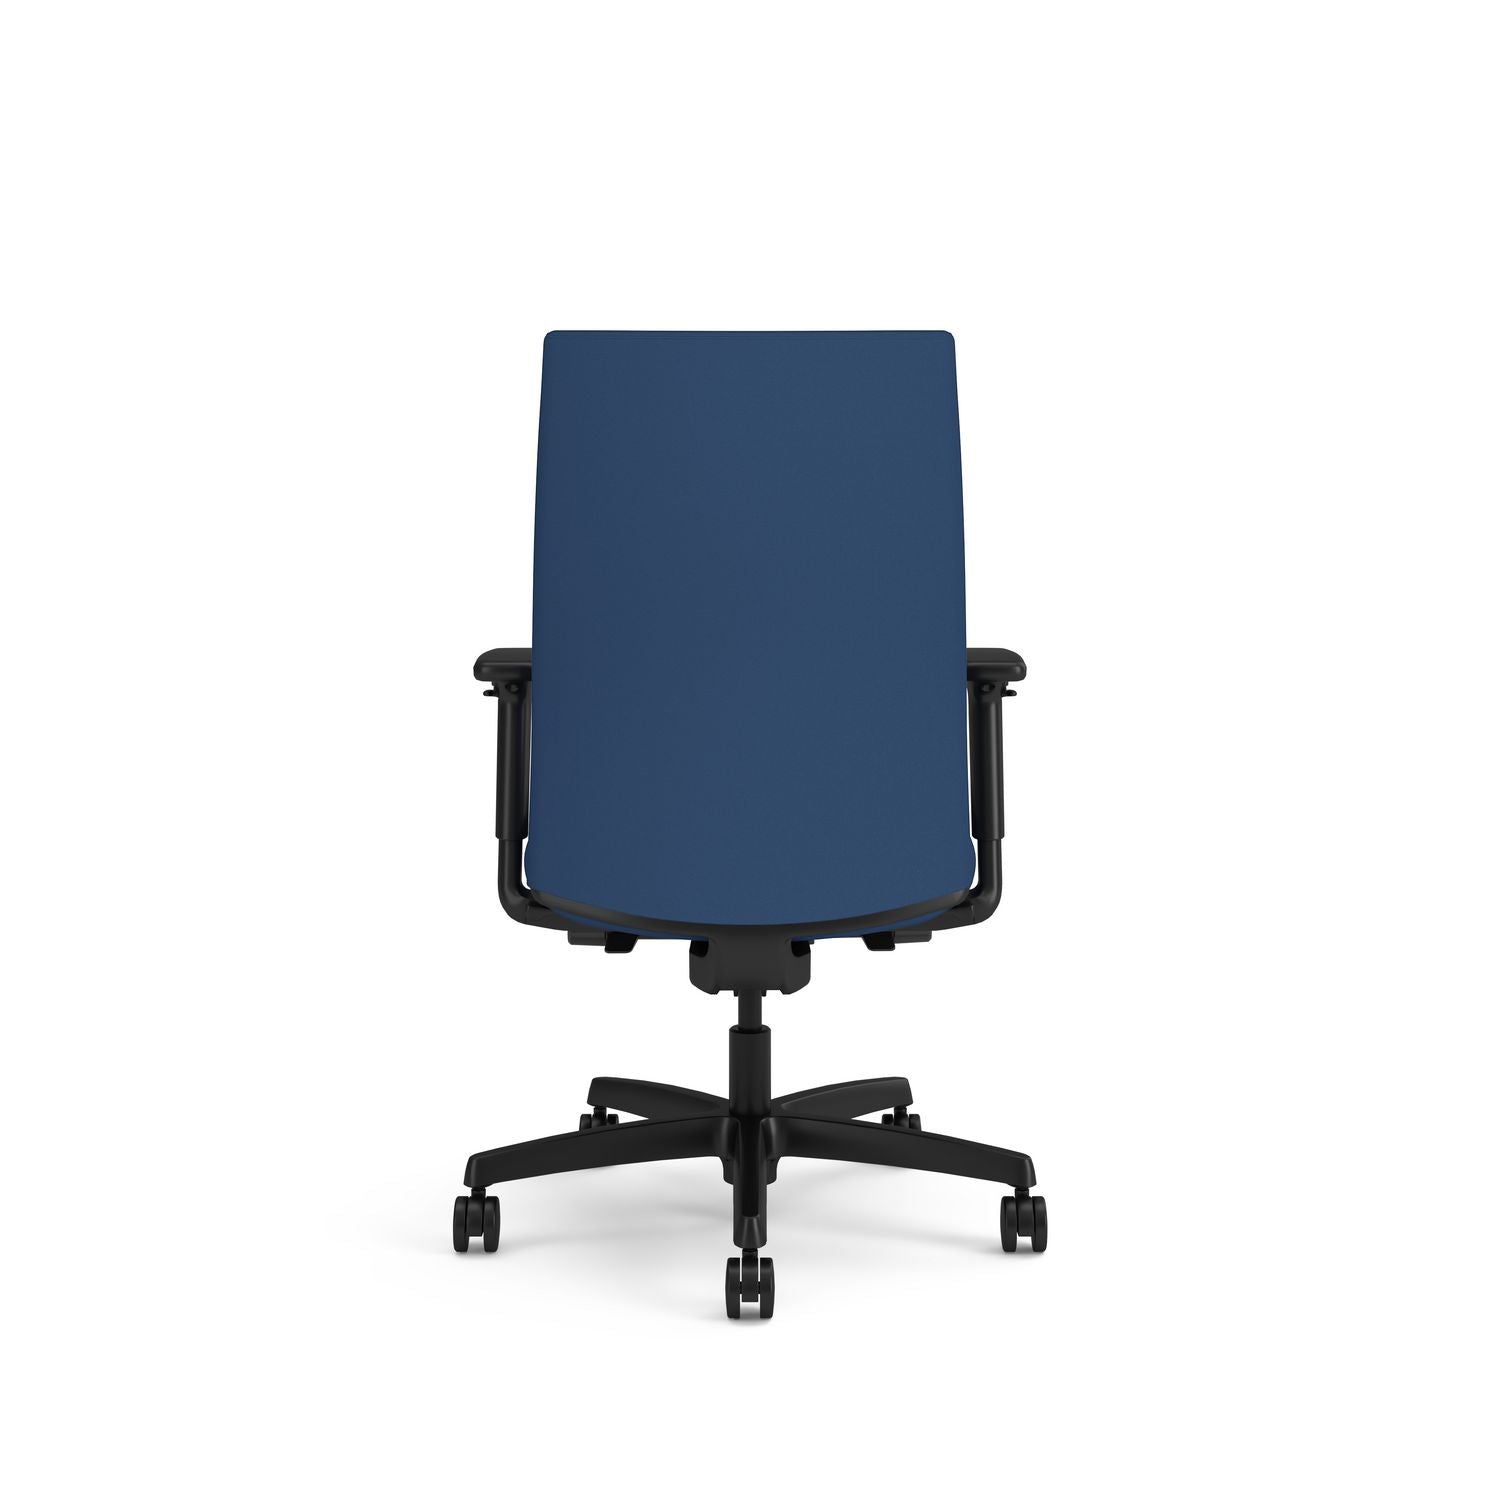 ignition-20-upholstered-mid-back-task-chair-up-to-300-lbs-17-to-215-seat-height-elysian-seat-and-back-black-base_honi2u2asx04ntk - 2